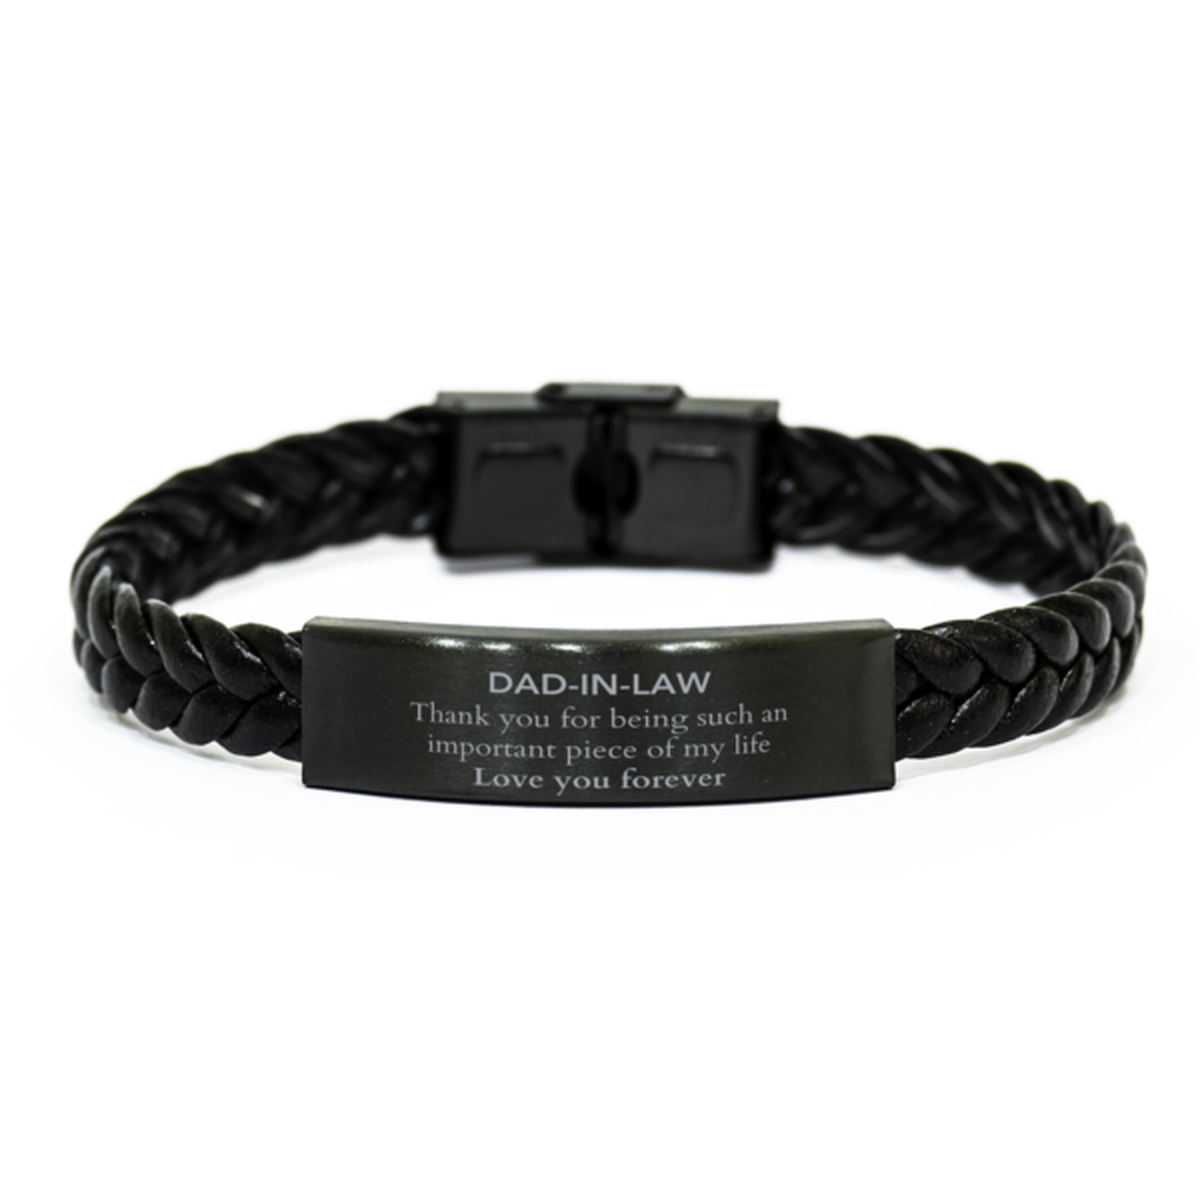 Appropriate Dad-in-law Braided Leather Bracelet Epic Birthday Gifts for Dad-in-law Thank you for being such an important piece of my life Dad-in-law Christmas Mothers Fathers Day